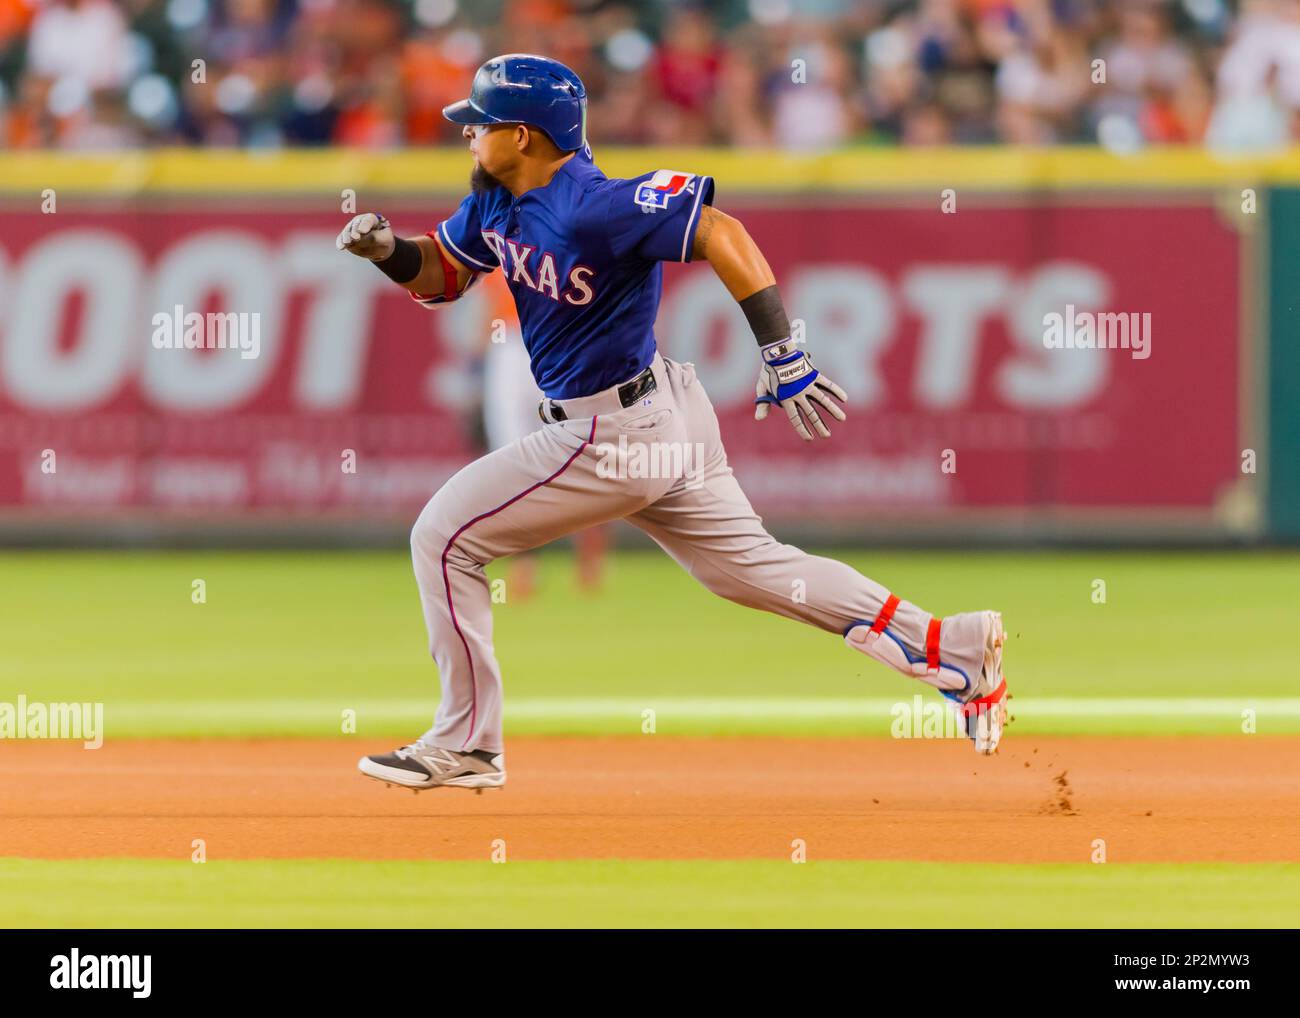 This is a 2015 photo of Rougned Odor of the Texas Rangers baseball team.  This image reflects the Texas Rangers active roster as of Monday, March 2,  2015, when this image was